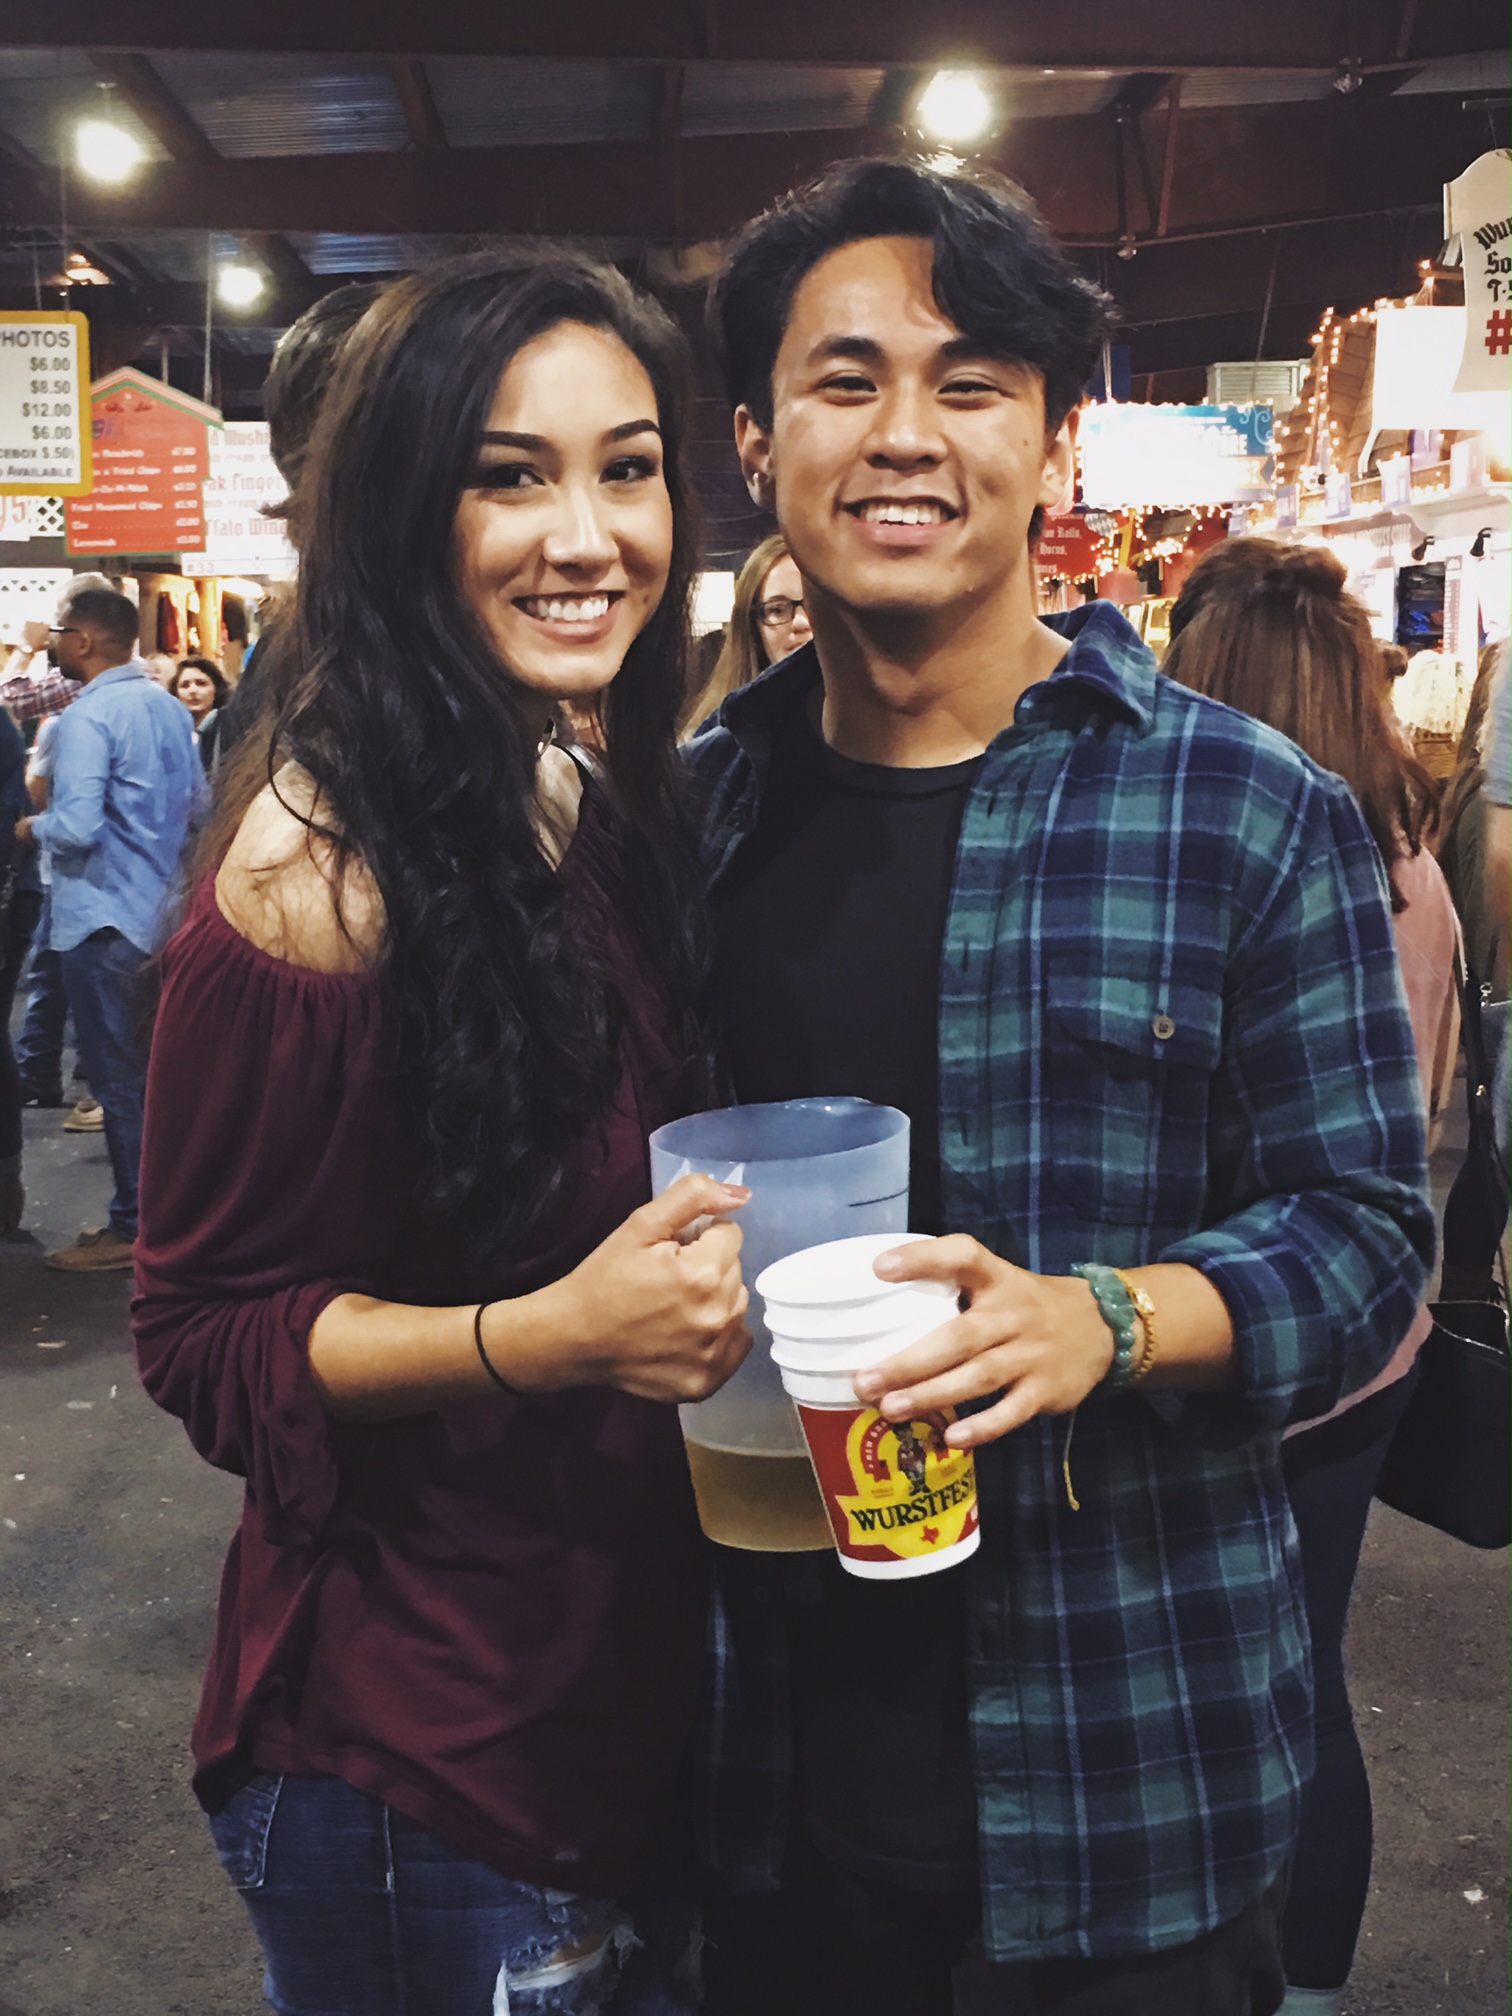 While many men seem to now want commitment, Brent is currently in a relationship with his girlfriend, Nadine. Photo courtesy of Brent Ramirez.